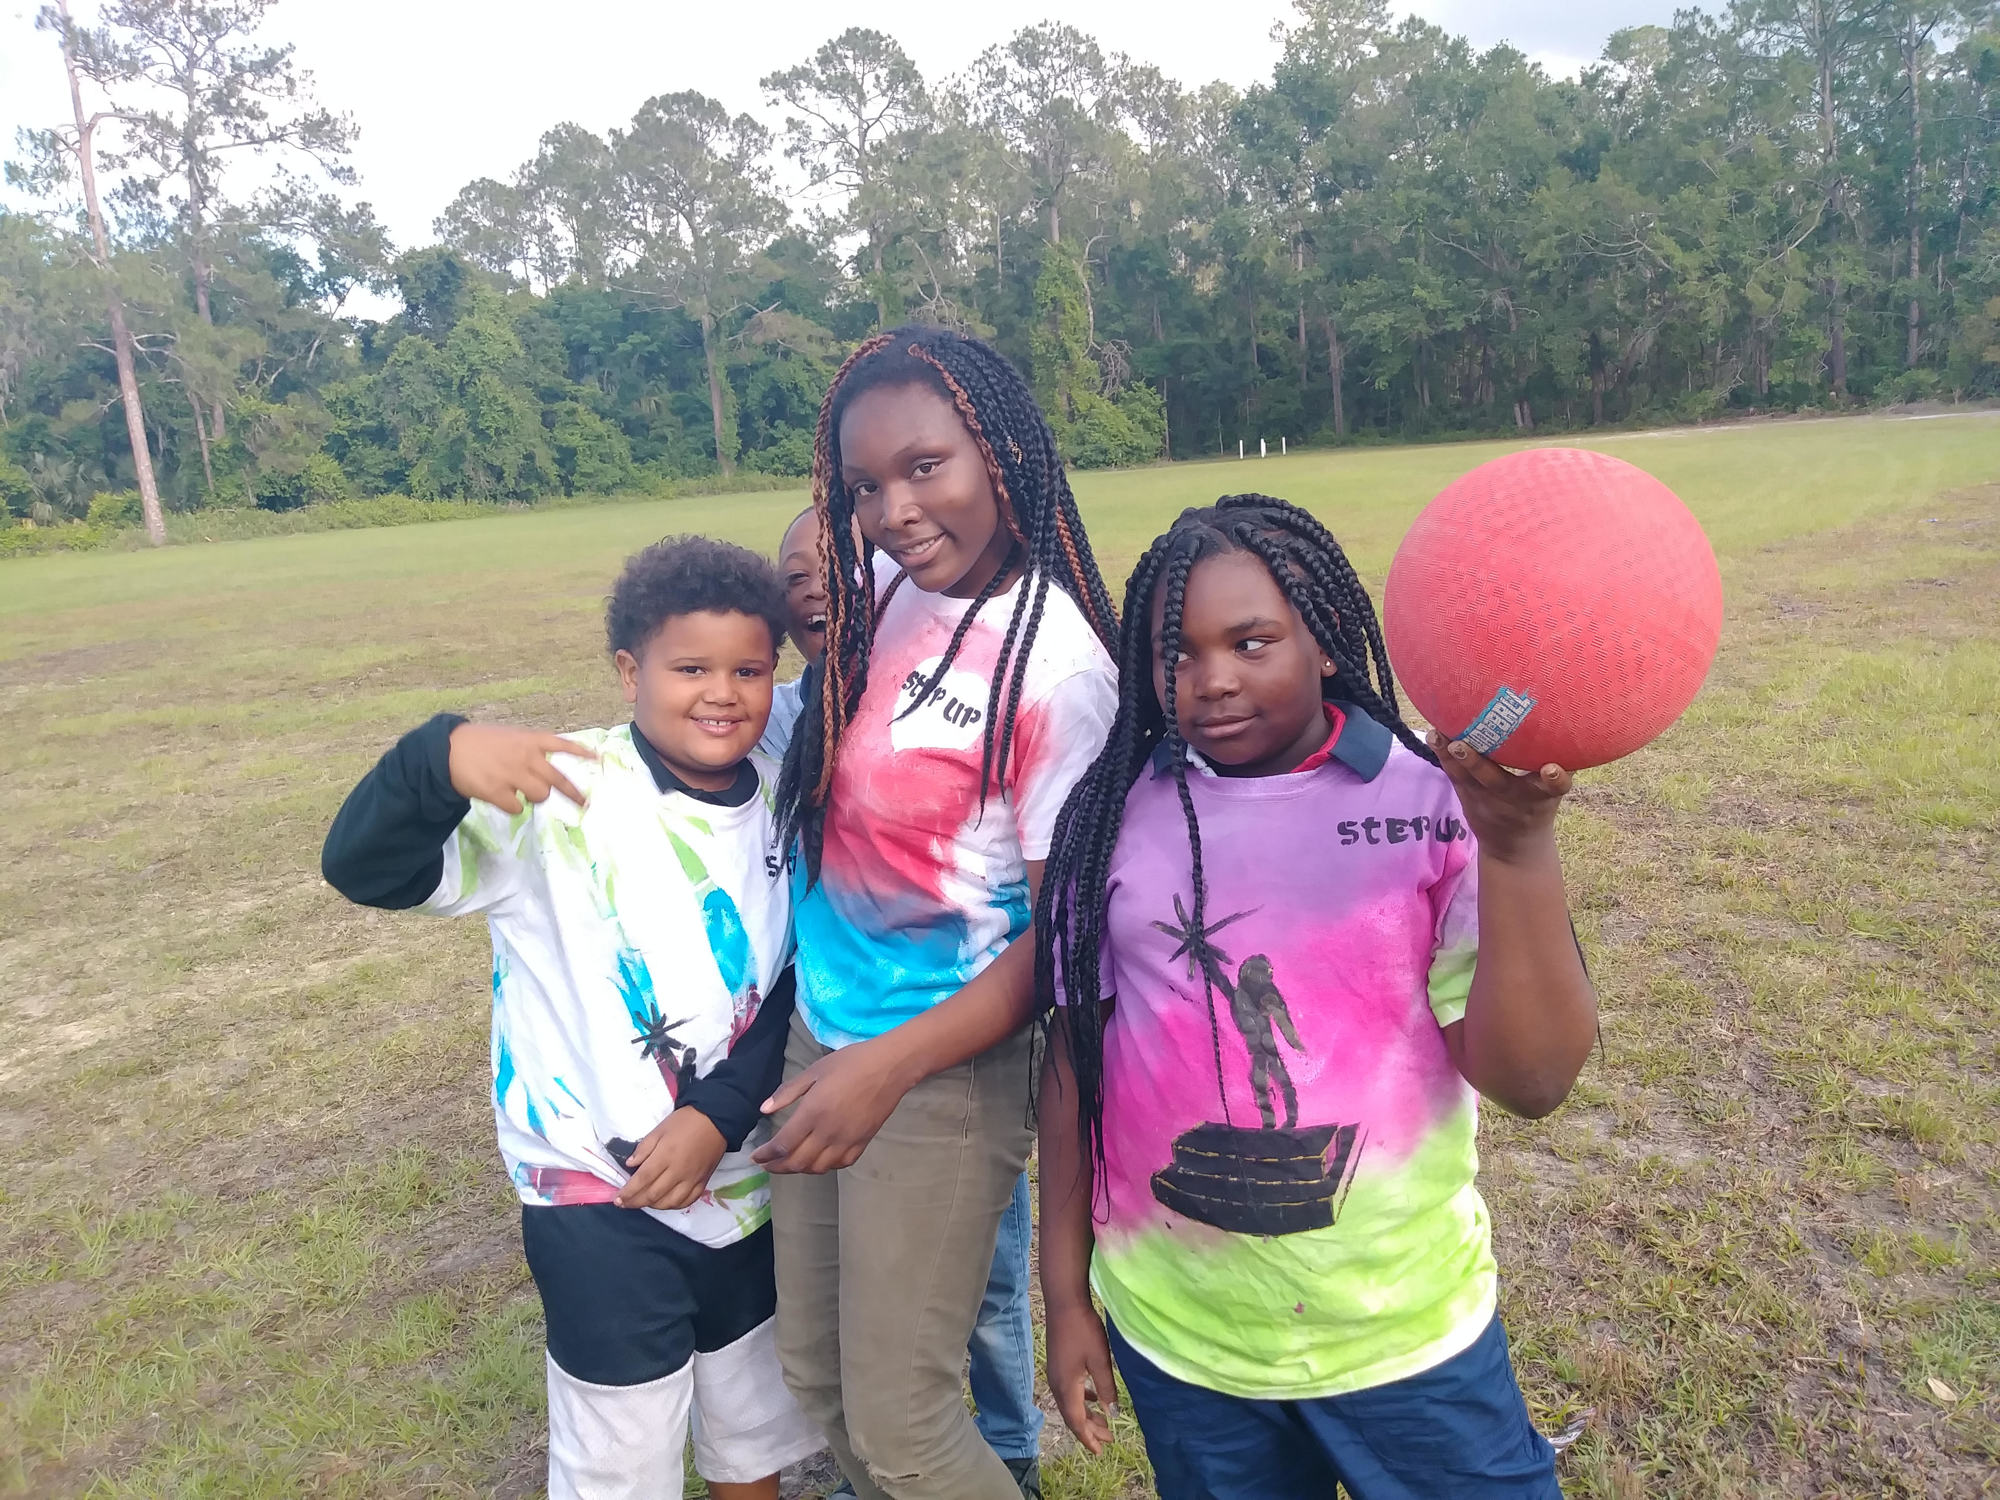 Tristan Harris, Asante Surrency, Shacoya Rozier and Tiffany Lorick at the Step Up Youth Group kickball game on May 2. Photo courtesy of Adrianna Watson